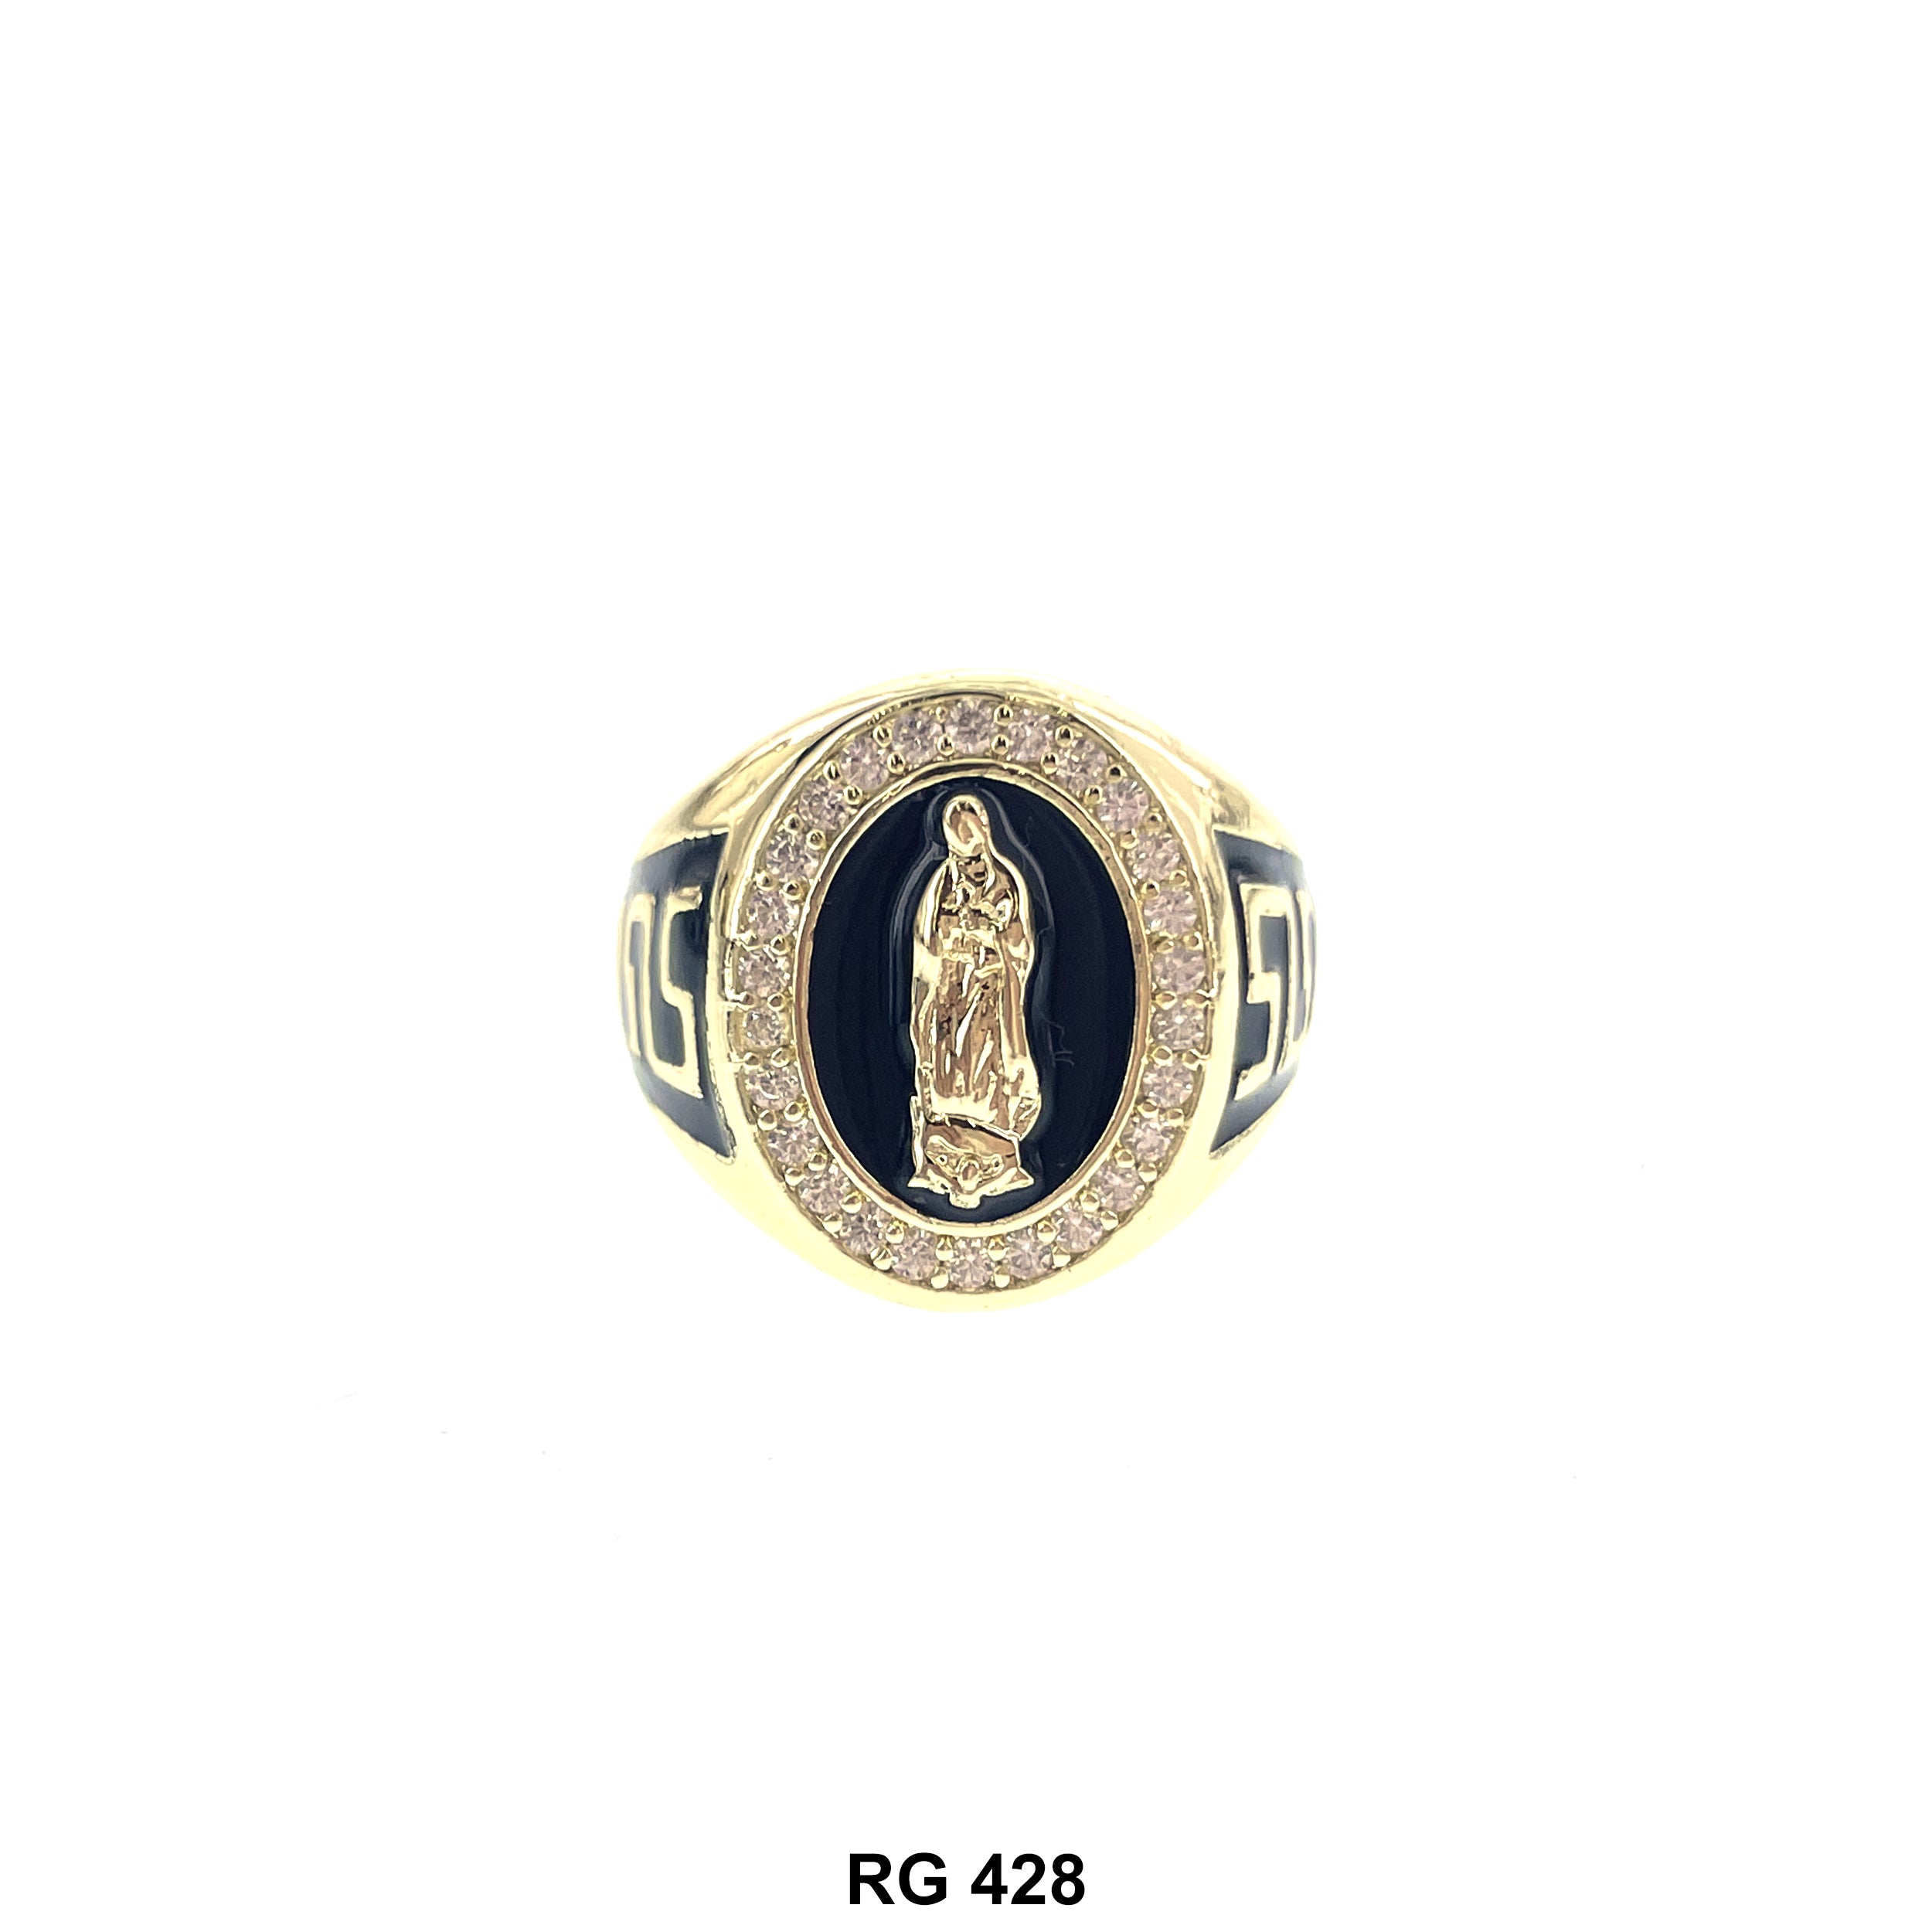 Guadalupe Adjustable Ring RG 428